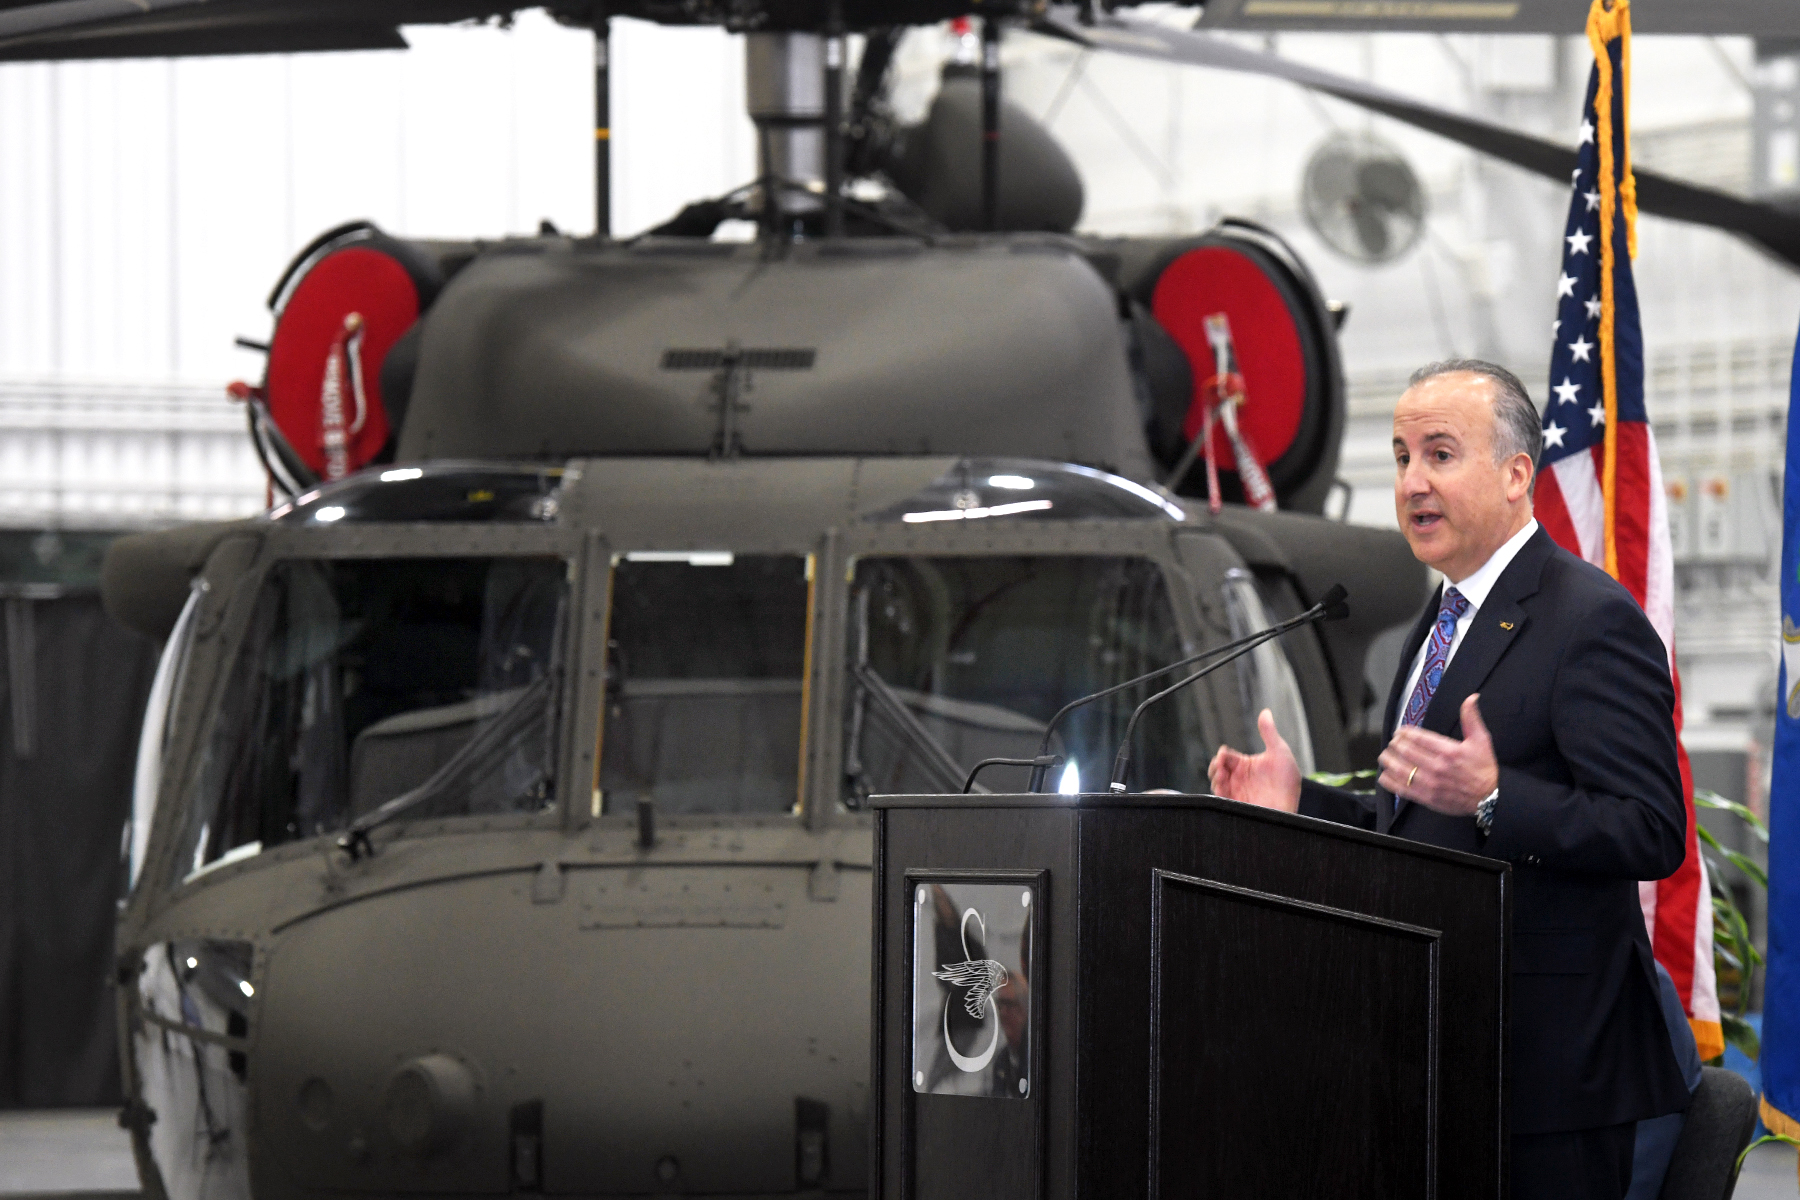 Sikorsky at 100 years: How the CT company changed the helicopter industry